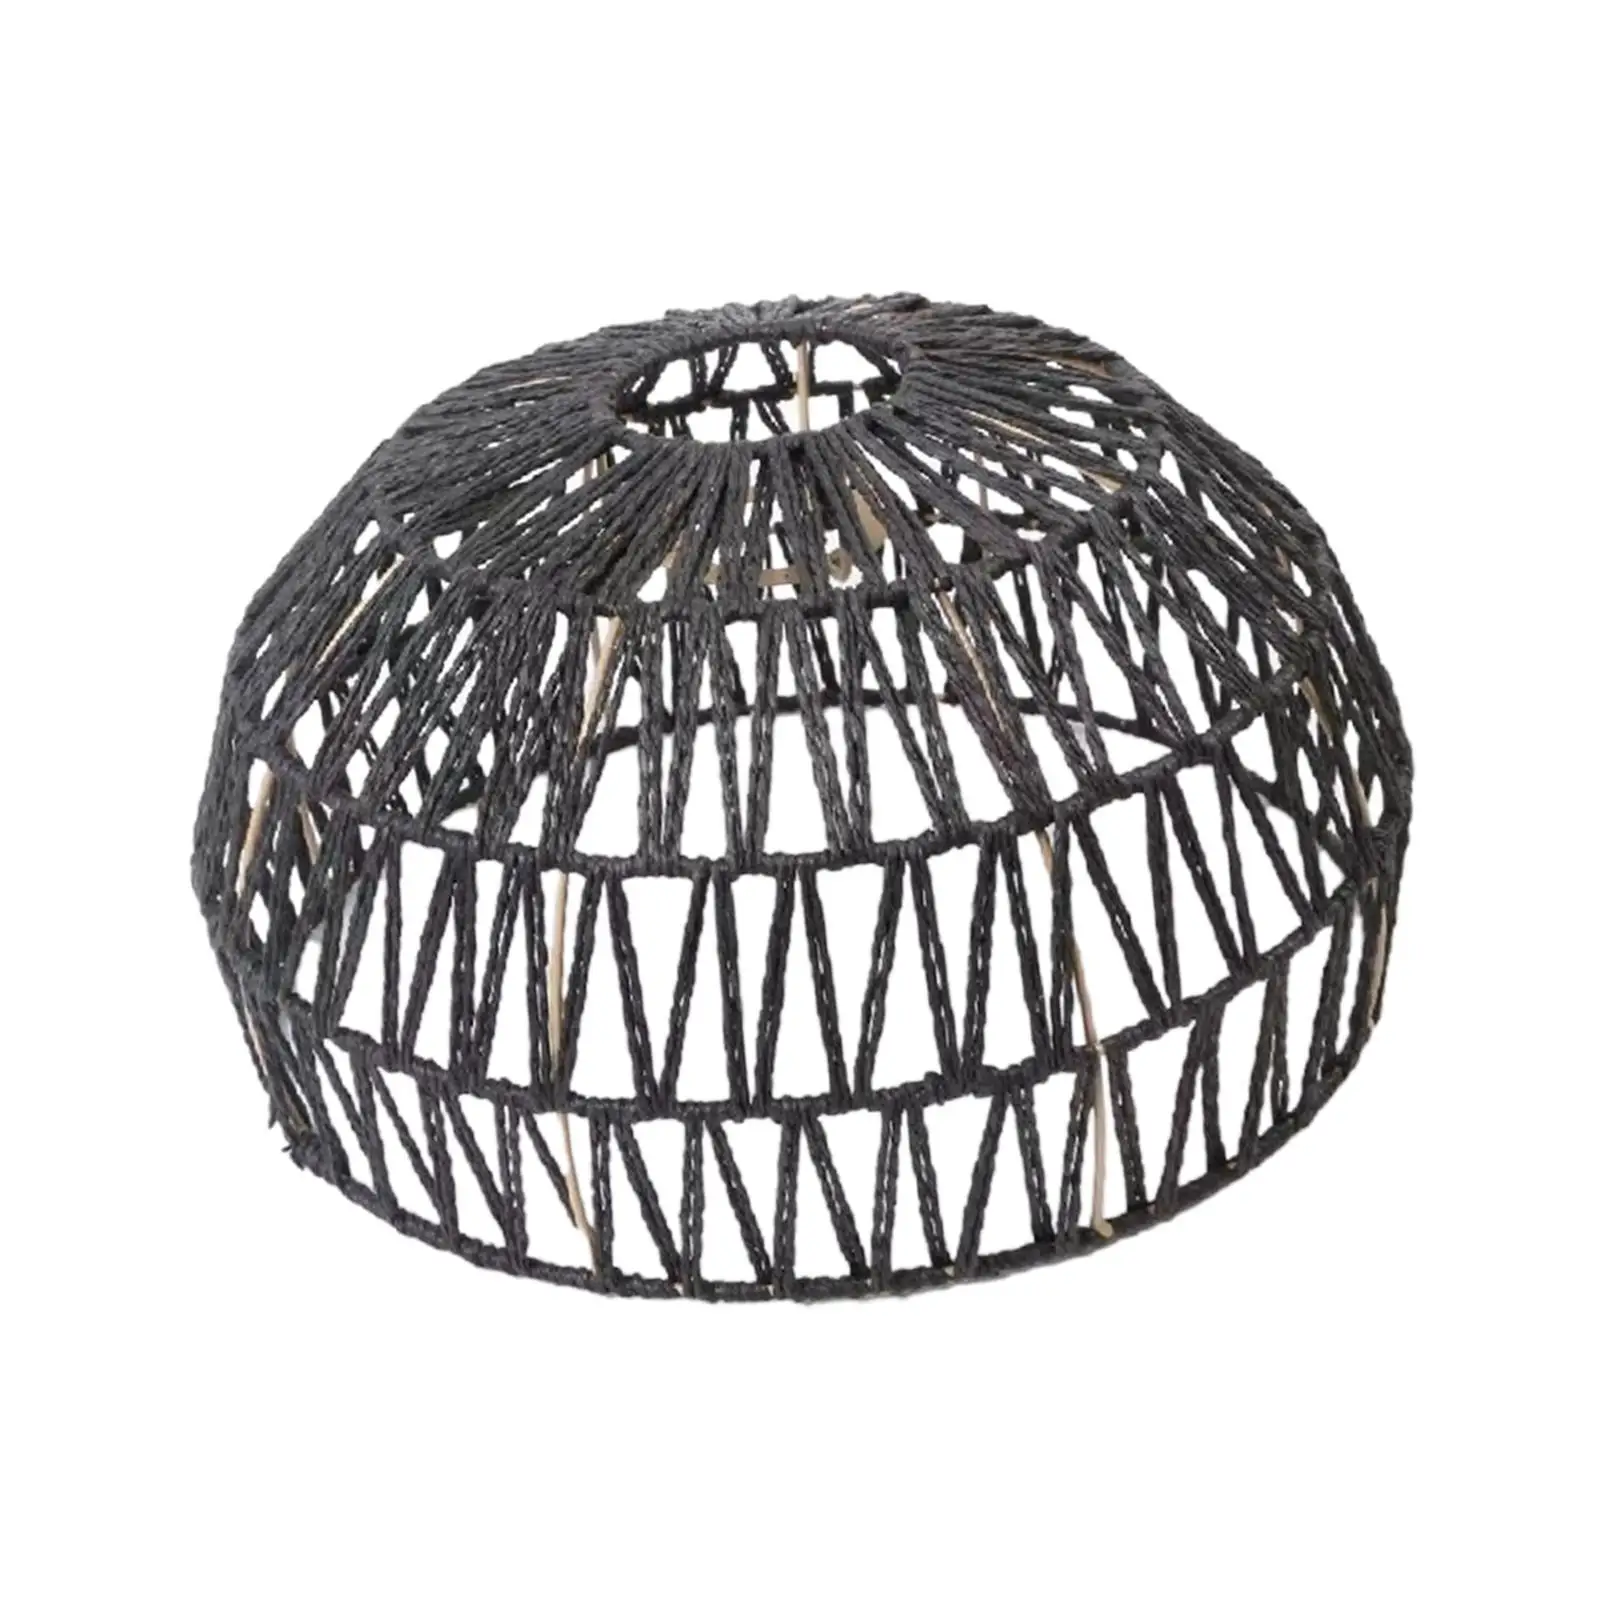 Retro Style Pendant Lamp Shade Decor Paper Rope Ceiling Light Shade Fixture Woven Chandelier Cover for Bedroom Cafe Hotel